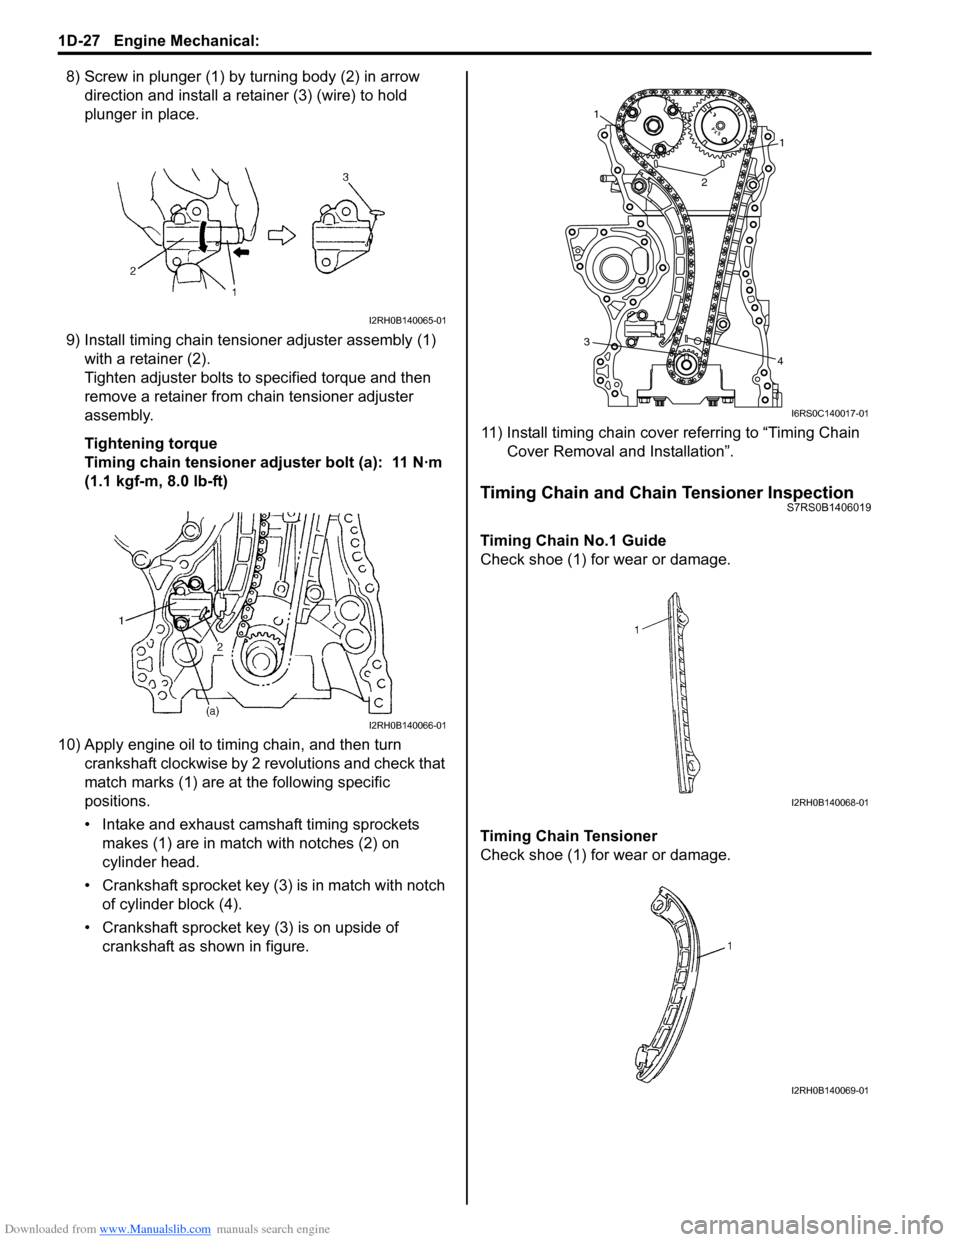 SUZUKI SWIFT 2005 2.G Service Workshop Manual Downloaded from www.Manualslib.com manuals search engine 1D-27 Engine Mechanical: 
8) Screw in plunger (1) by turning body (2) in arrow direction and install a reta iner (3) (wire) to hold 
plunger in